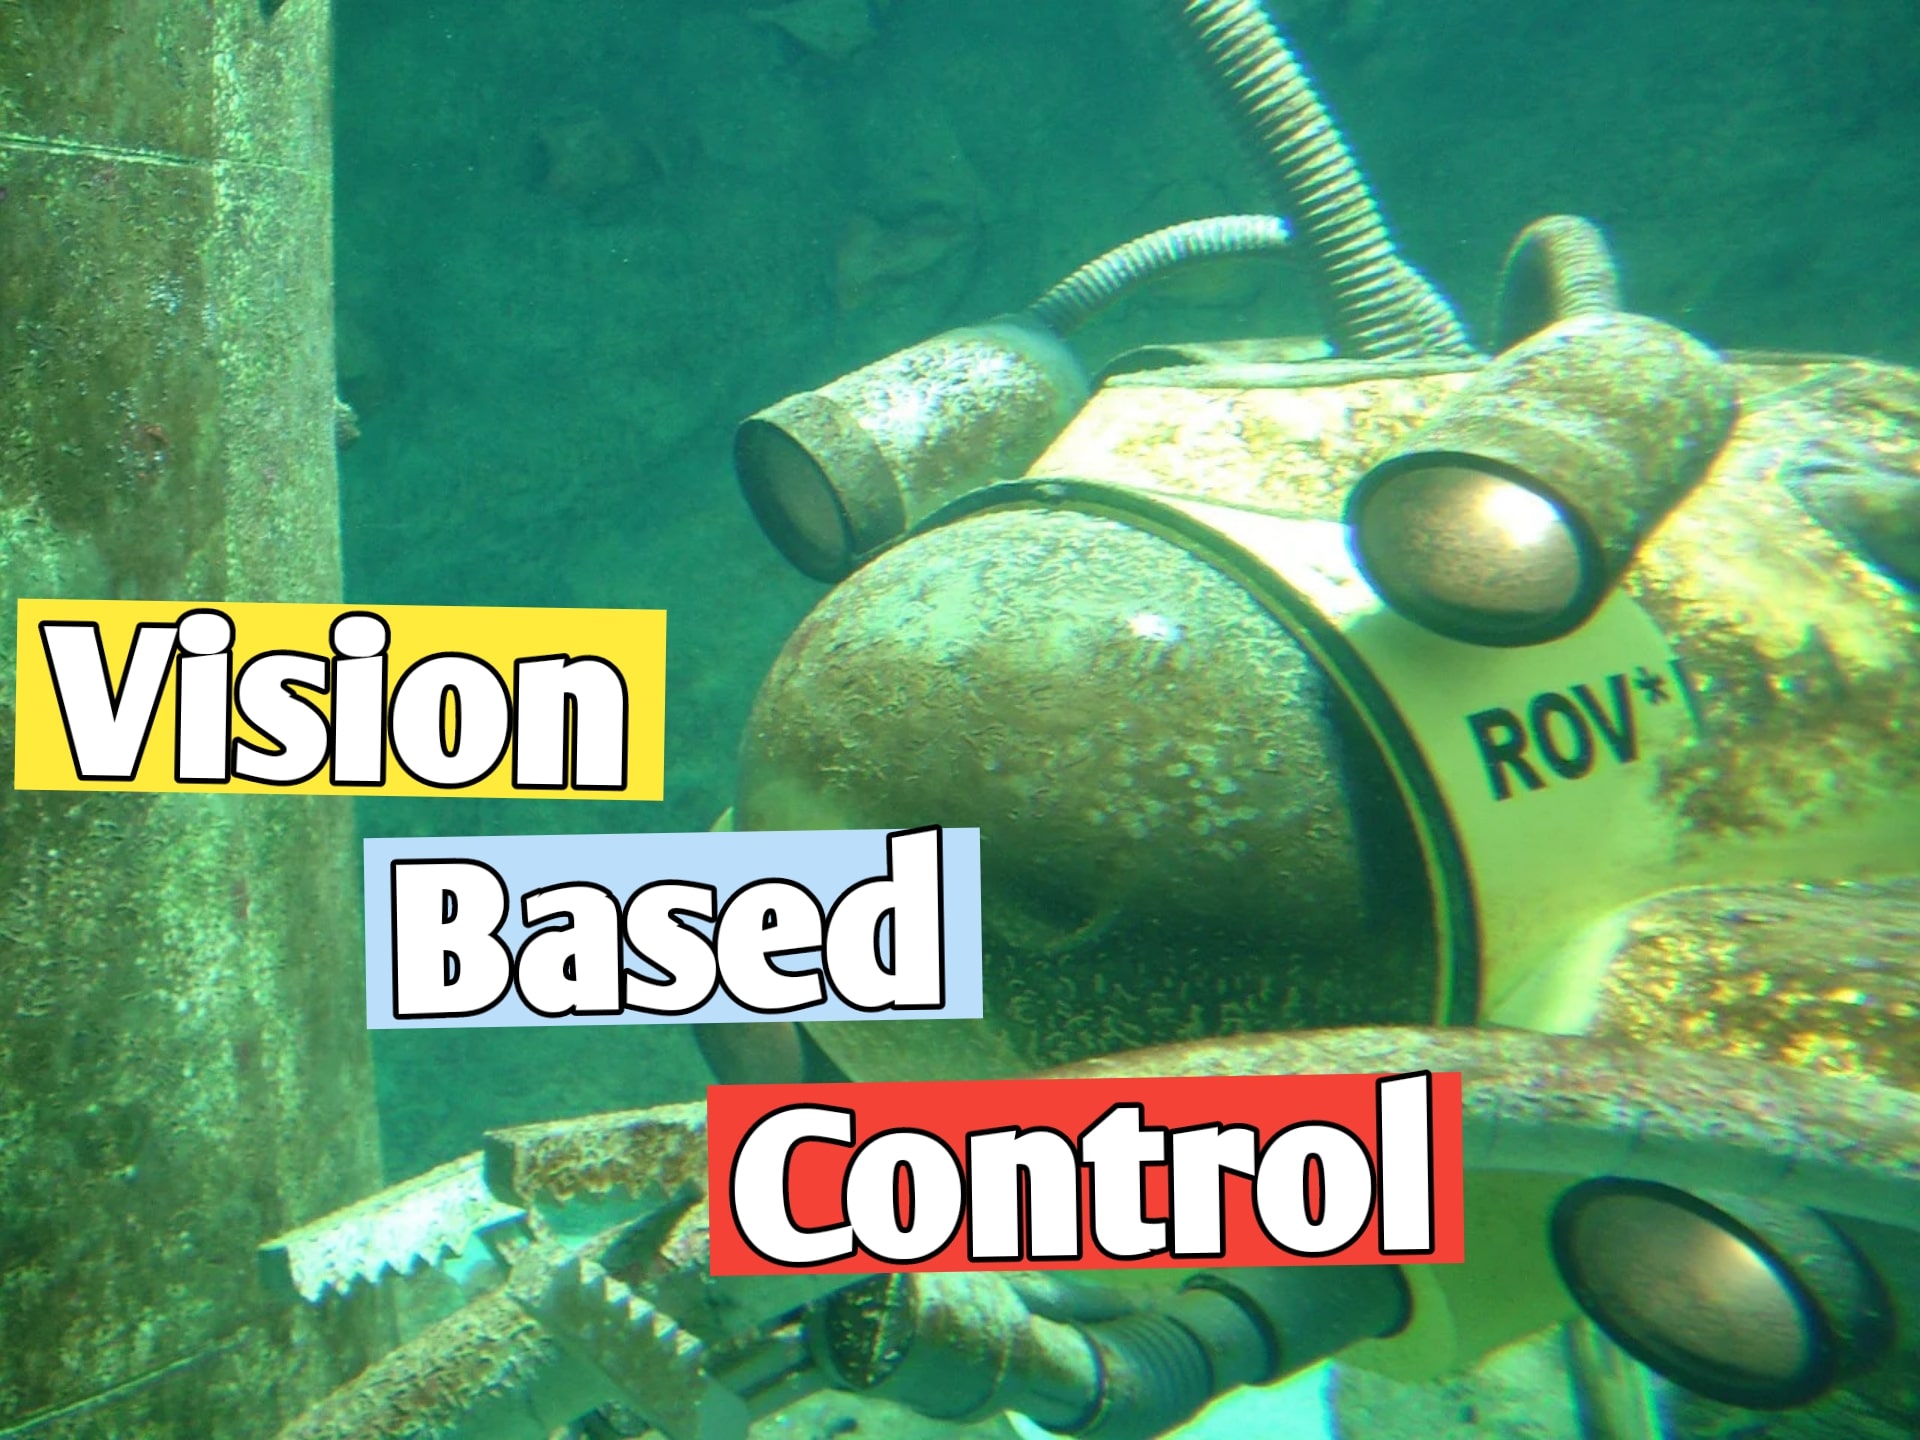 Vision Based Control